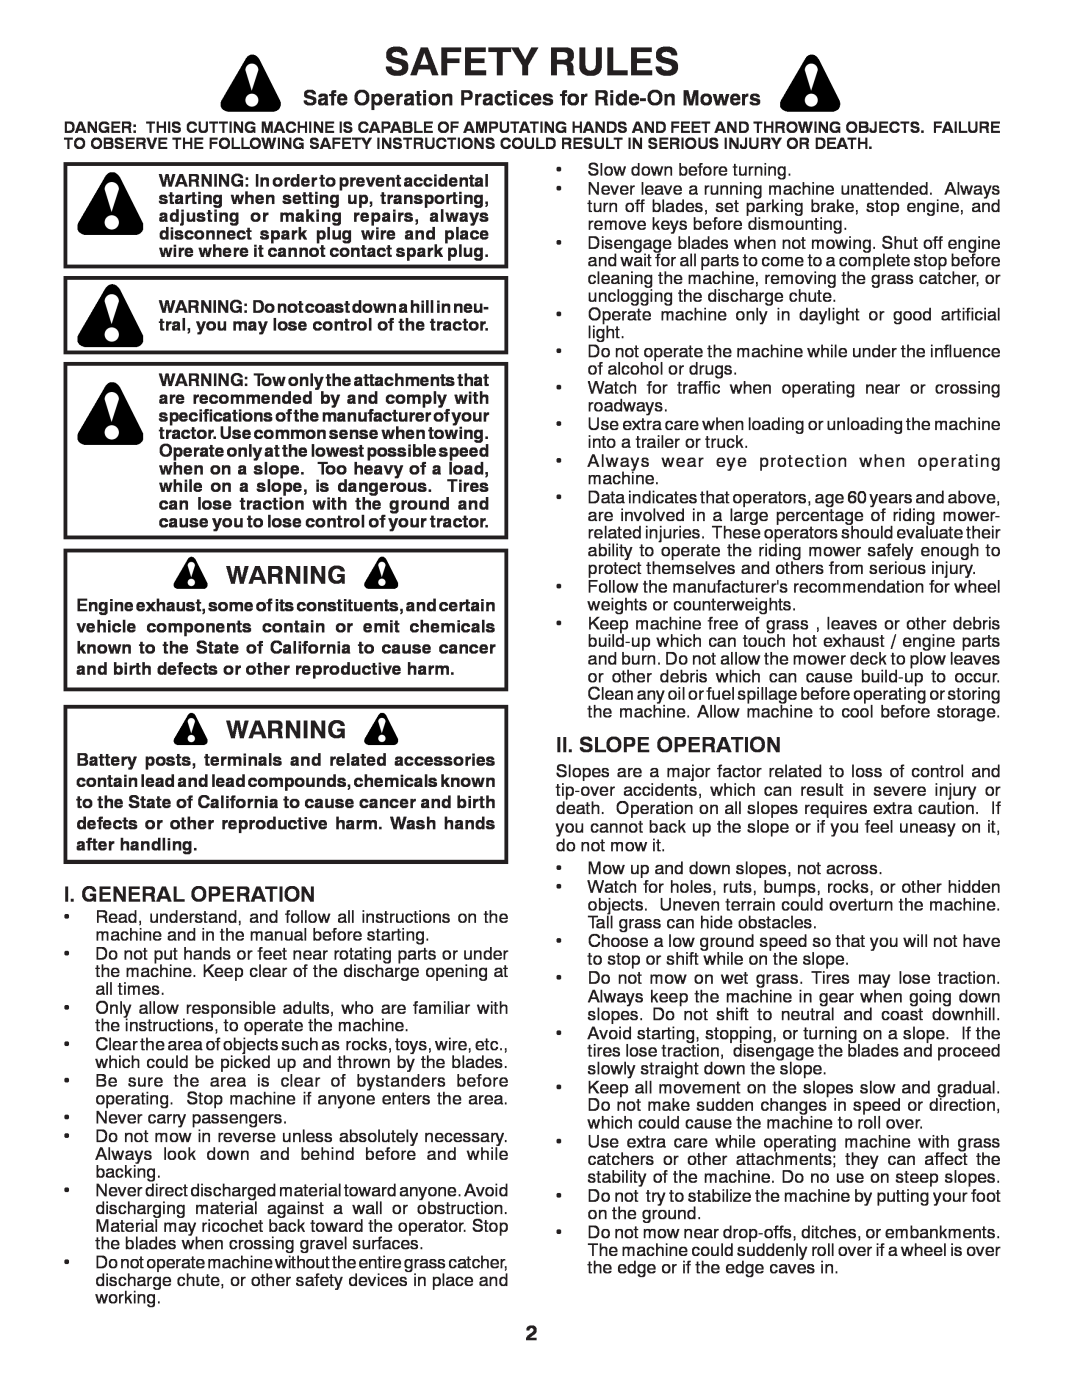 Dixon 434722, D26BH54 Safety Rules, Safe Operation Practices for Ride-On Mowers, I. General Operation, Ii. Slope Operation 